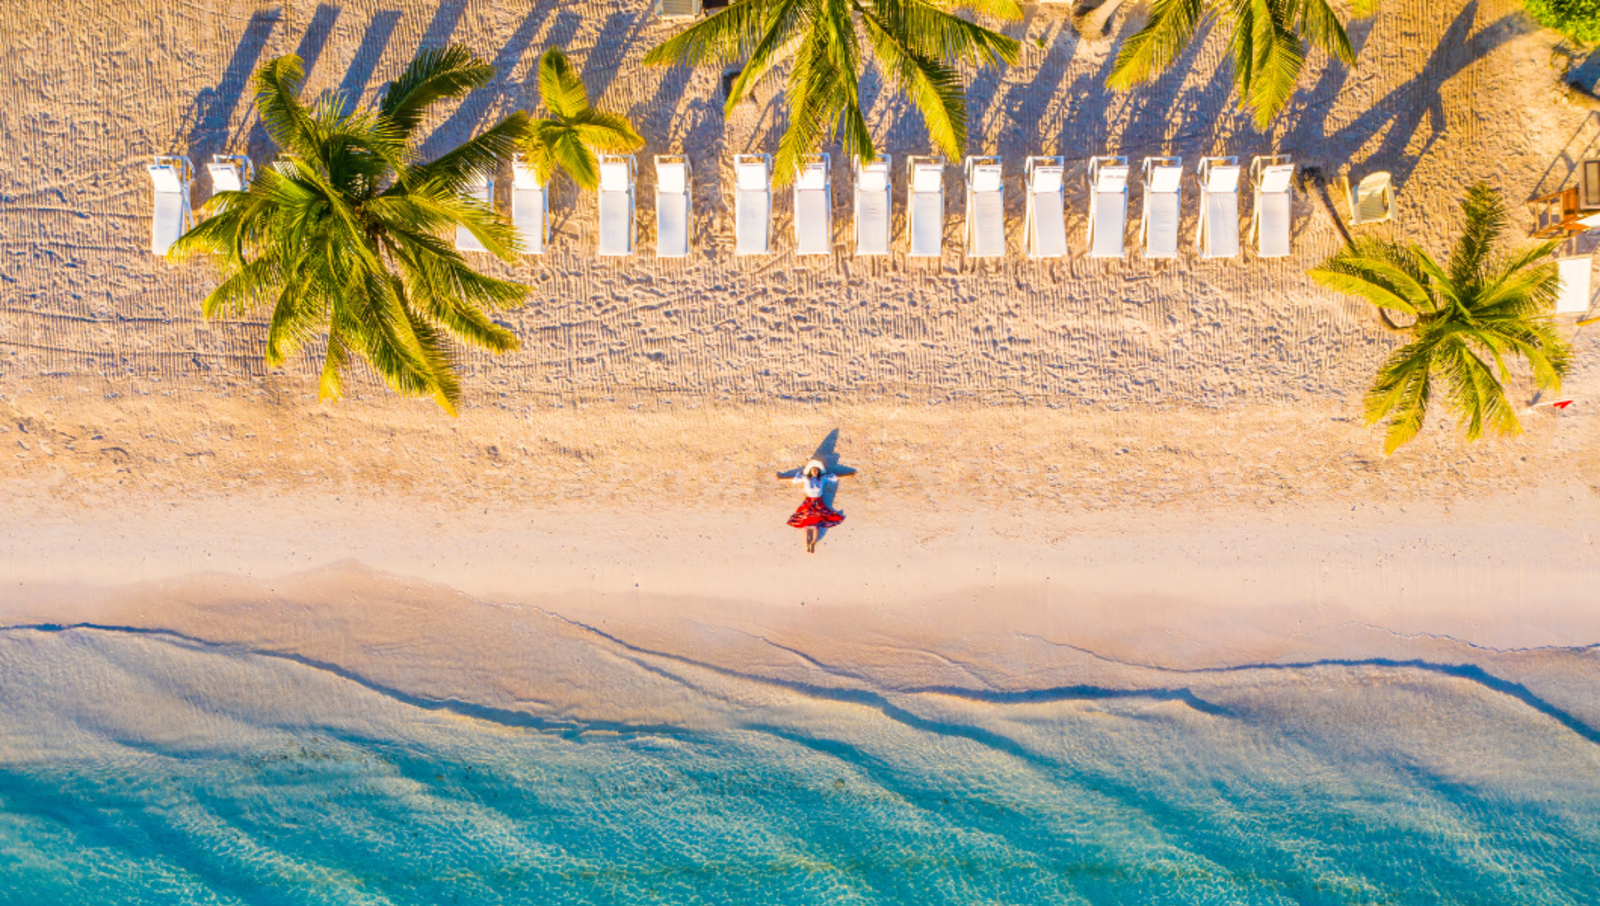 Aerial photo of a woman lying on the beach with beach chairs and palm trees